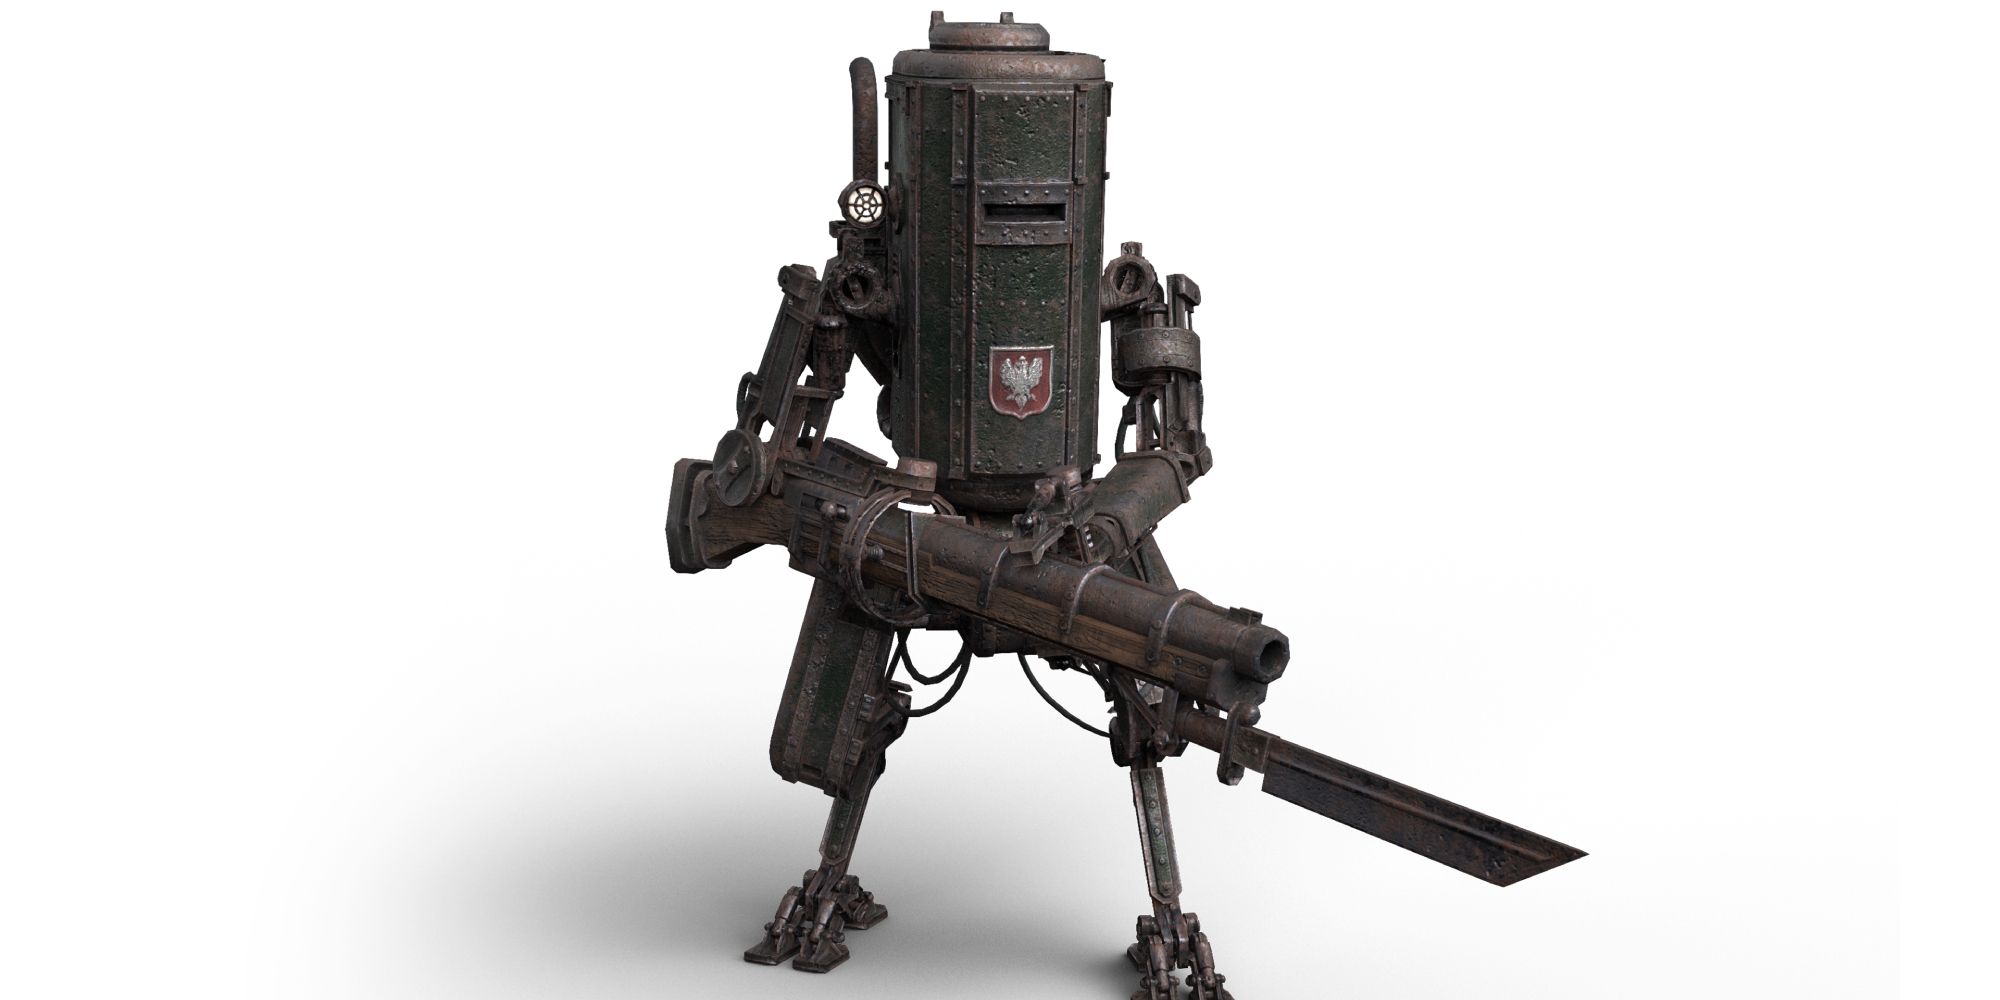 Iron Harvest Mechs a wide shot of the tall and thin cylindrical mech PZM-7 Smialy holding a long rifle with a bayonet at the end against a white background